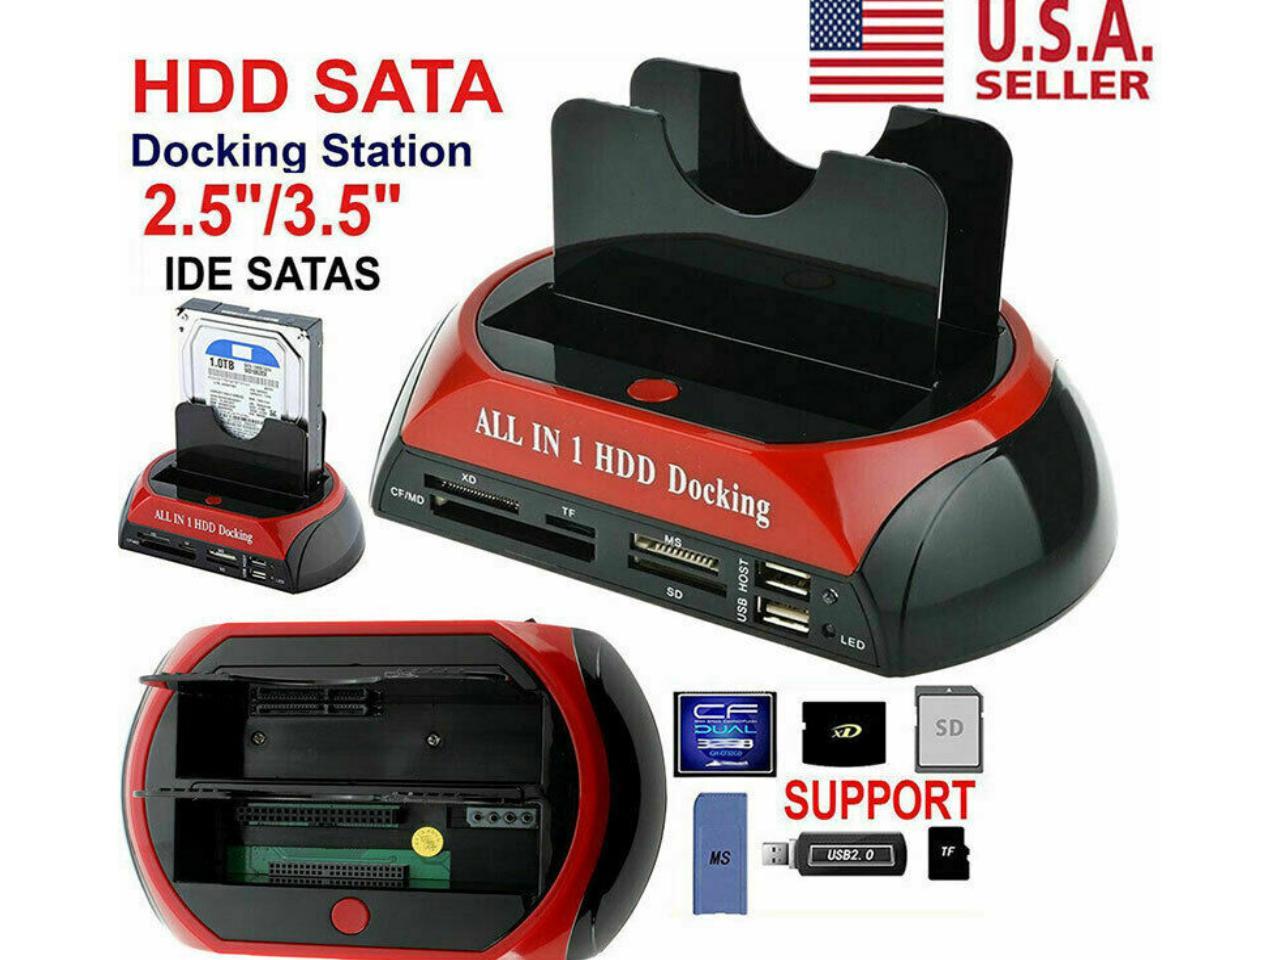 Slots HDD/SSD Dock USB 2.0 to SATA and IDE External Hard Drive Docking Station for 2.5 or 3.5 inch HDD, SSD 5Gbps Dual bay Hard Drive Enclosures, All in 1